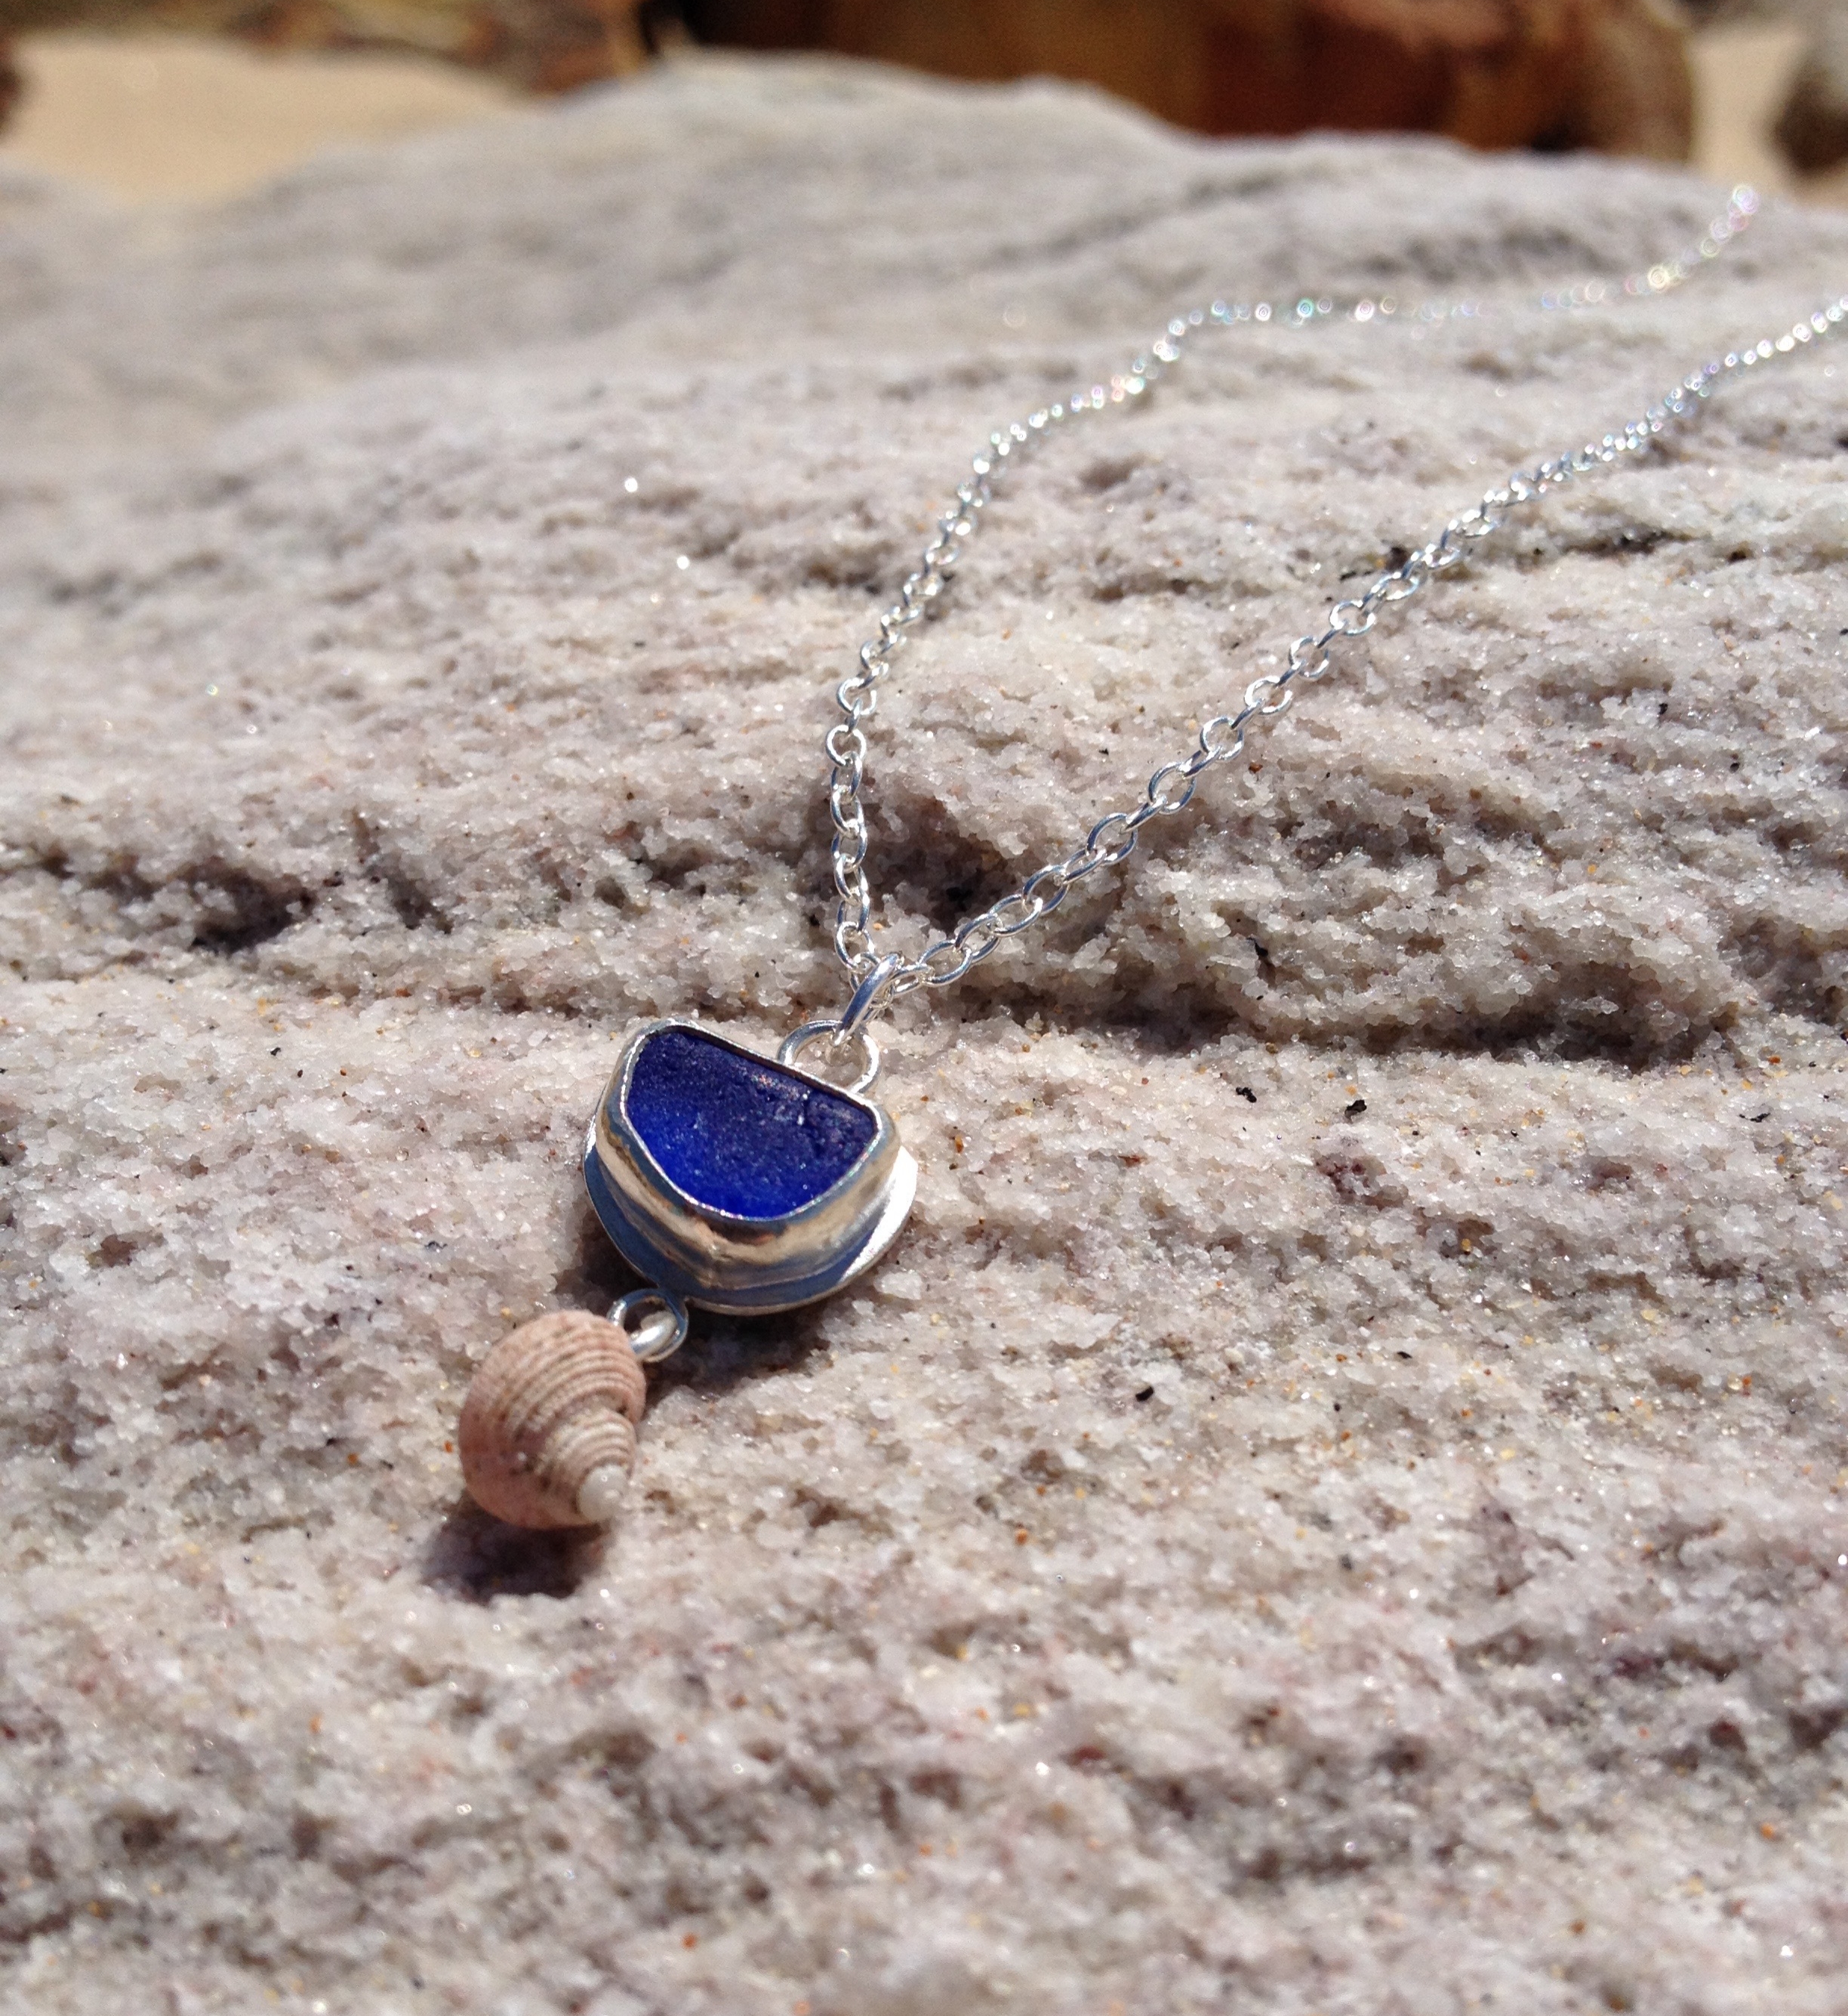 Amazon.com: Genuine Cobalt Blue Sea Glass Necklace in a Glass Vial on a  Leather Cord : Handmade Products